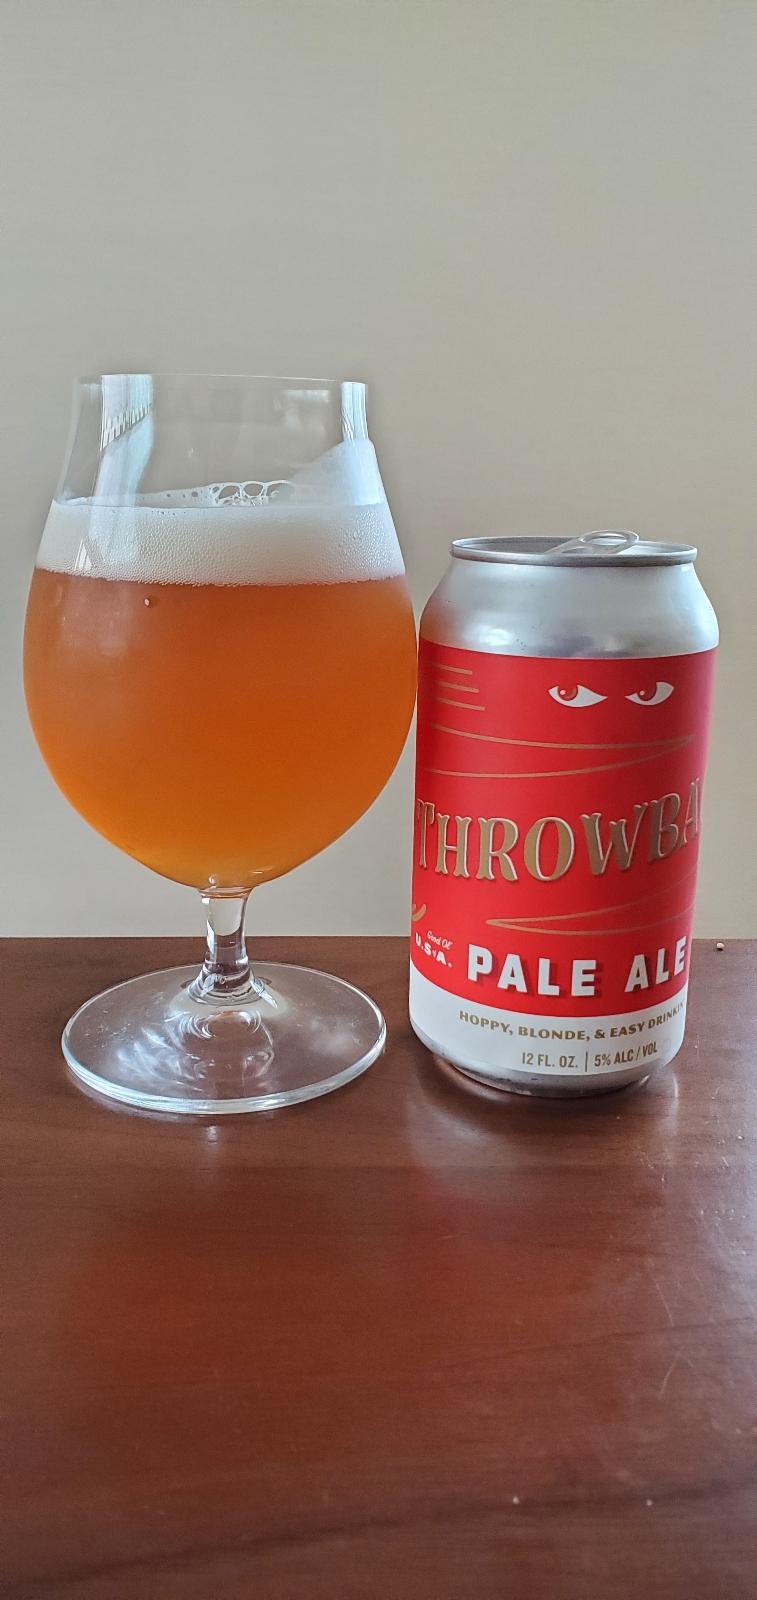 Throwback Pale Ale